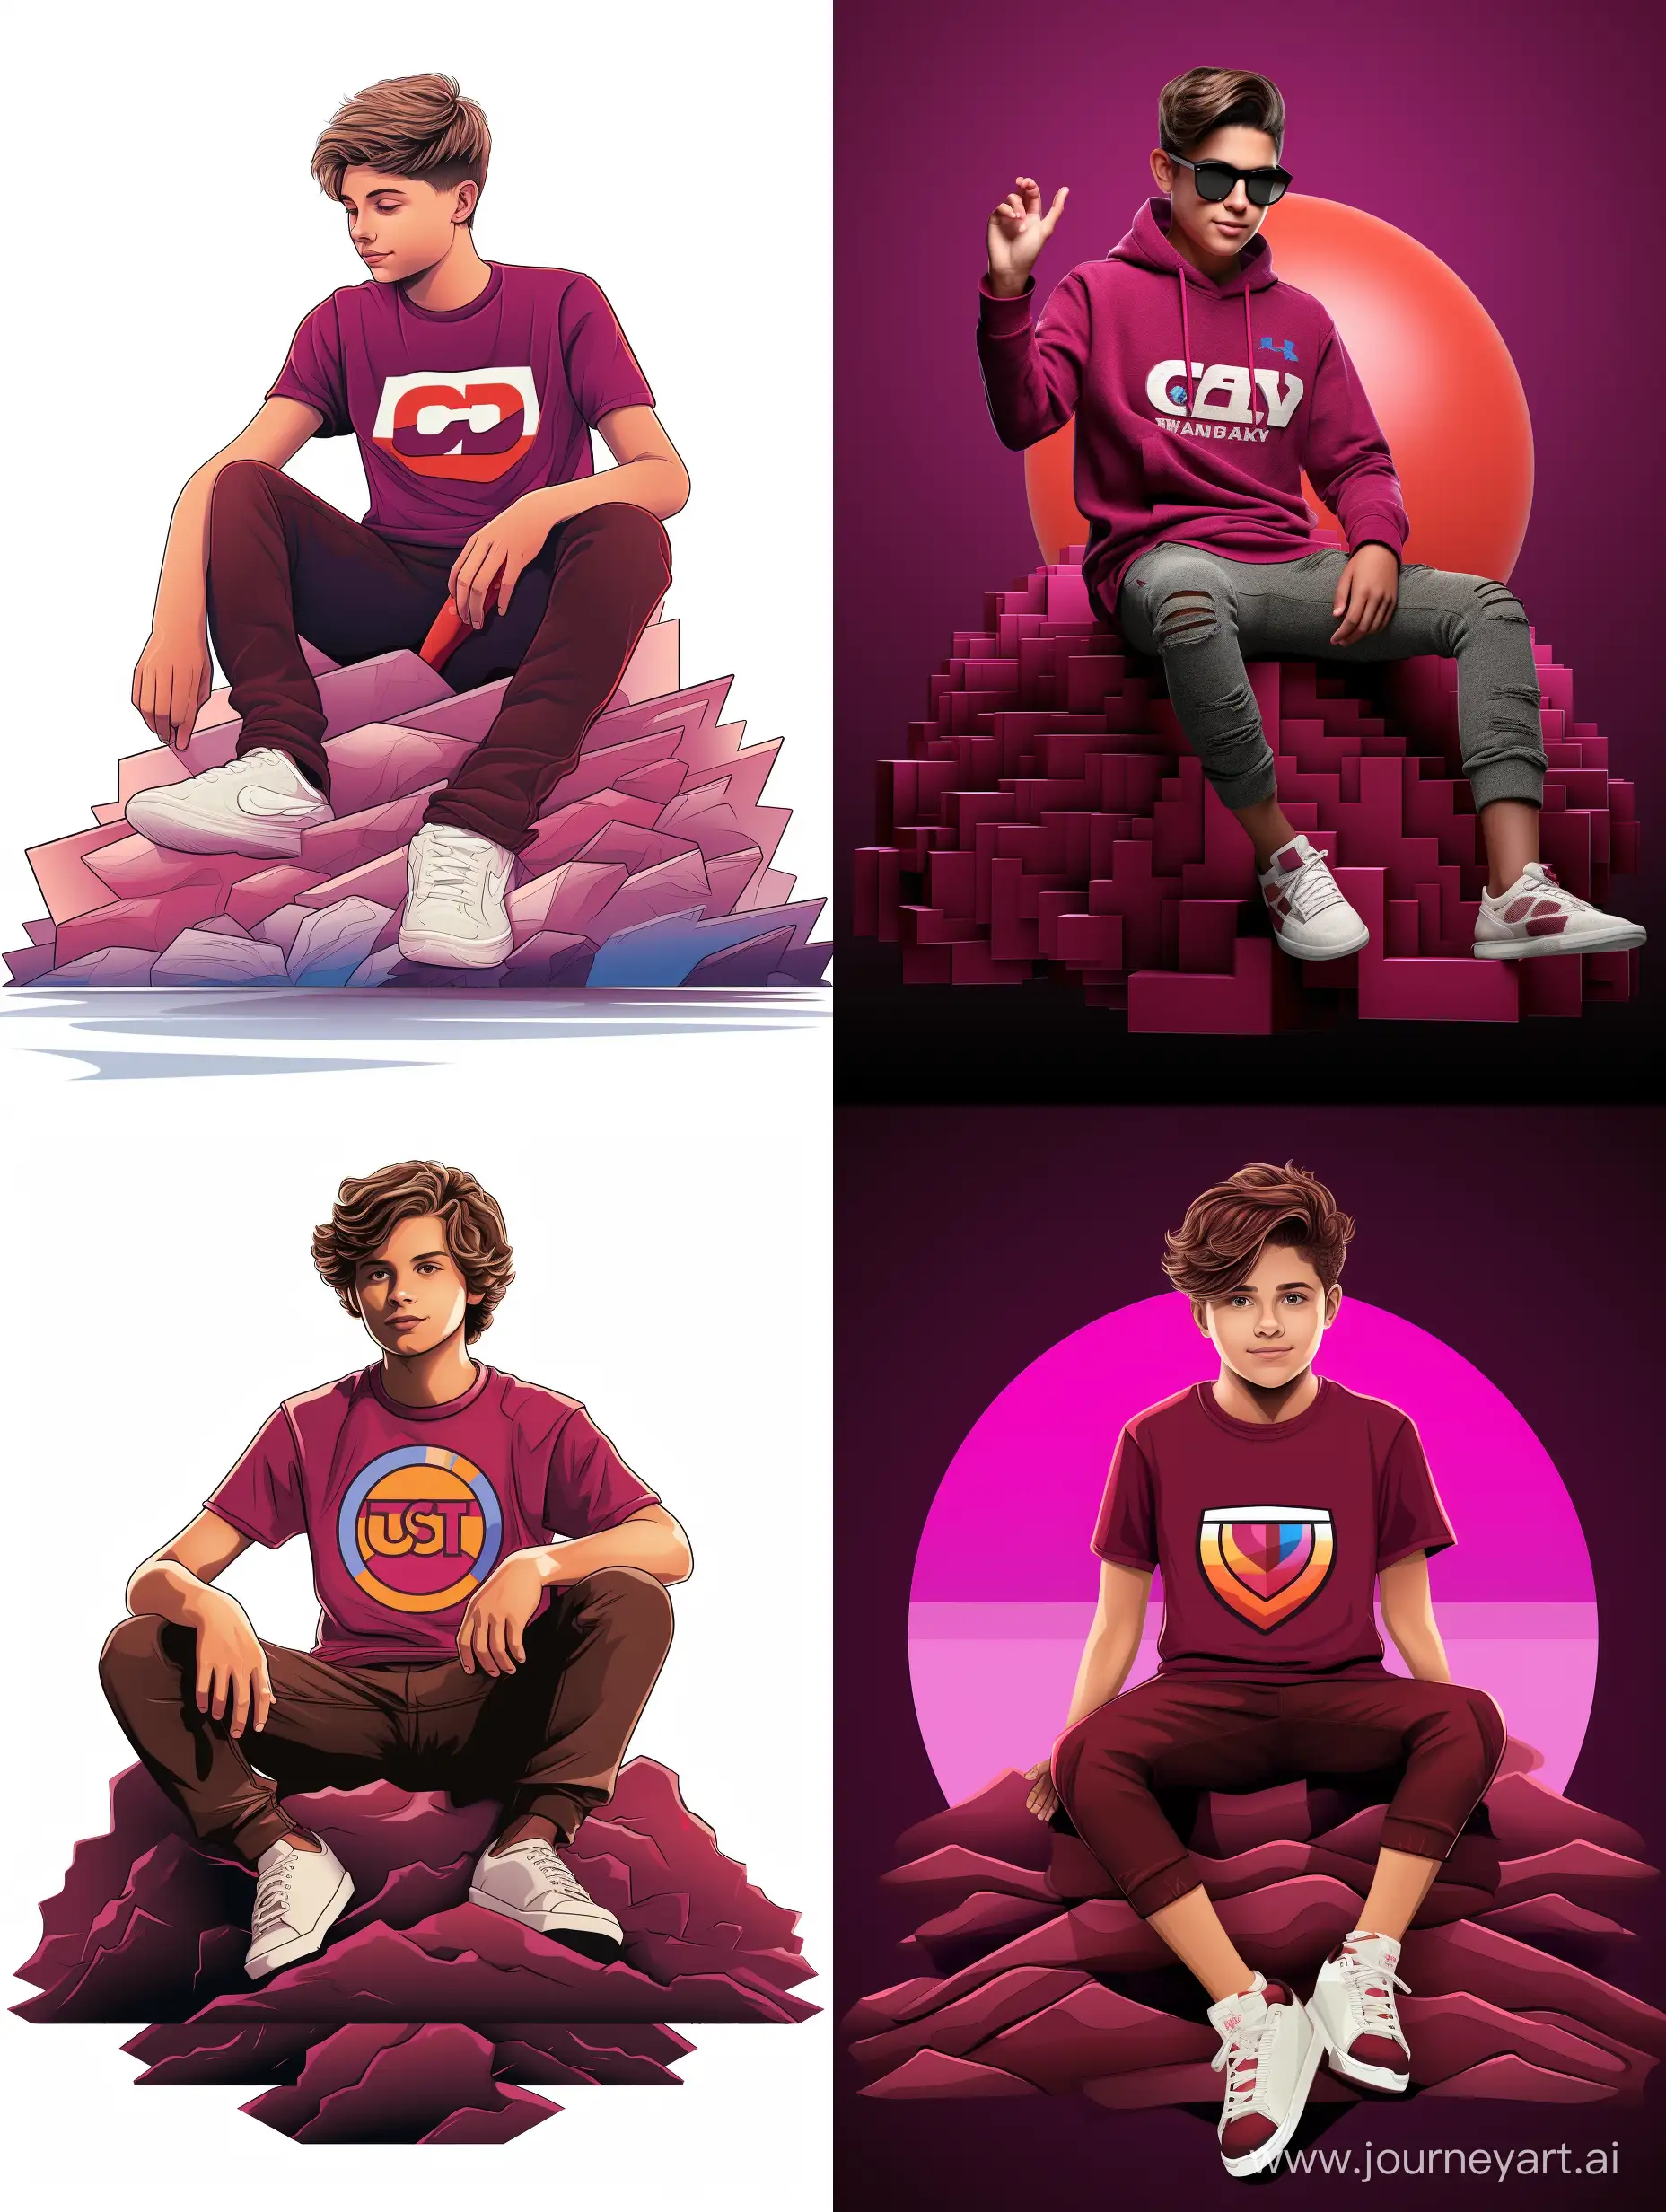 Teen boy sitting casually on top of "Instagram" logo. The character must wearing cherry name printed tshirt. The background of the image is a social media profile page with a user name "charan_cherry974" and a profile picture of character, 3d